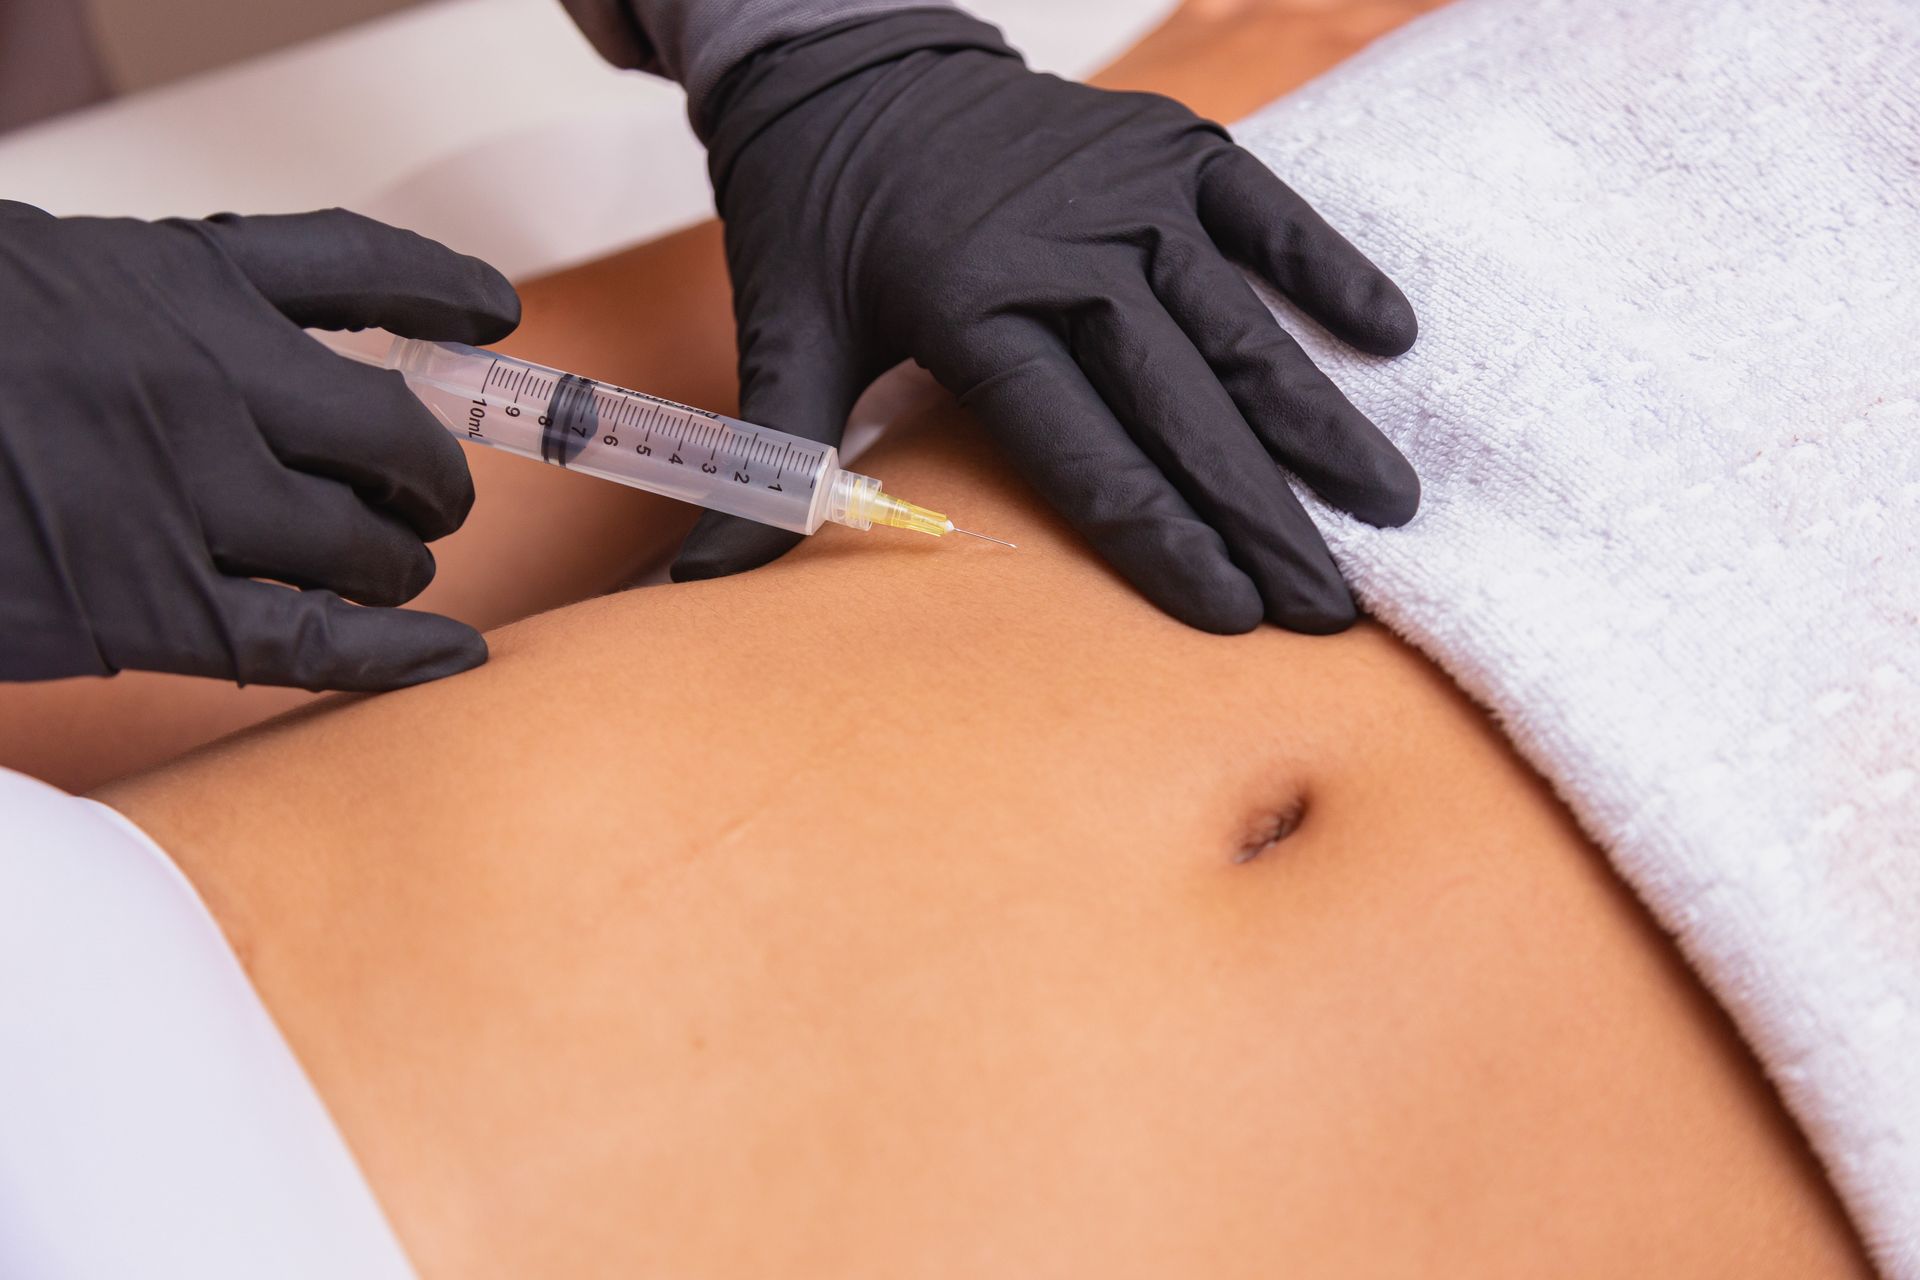 a woman is getting a fat reduction injection with a syringe